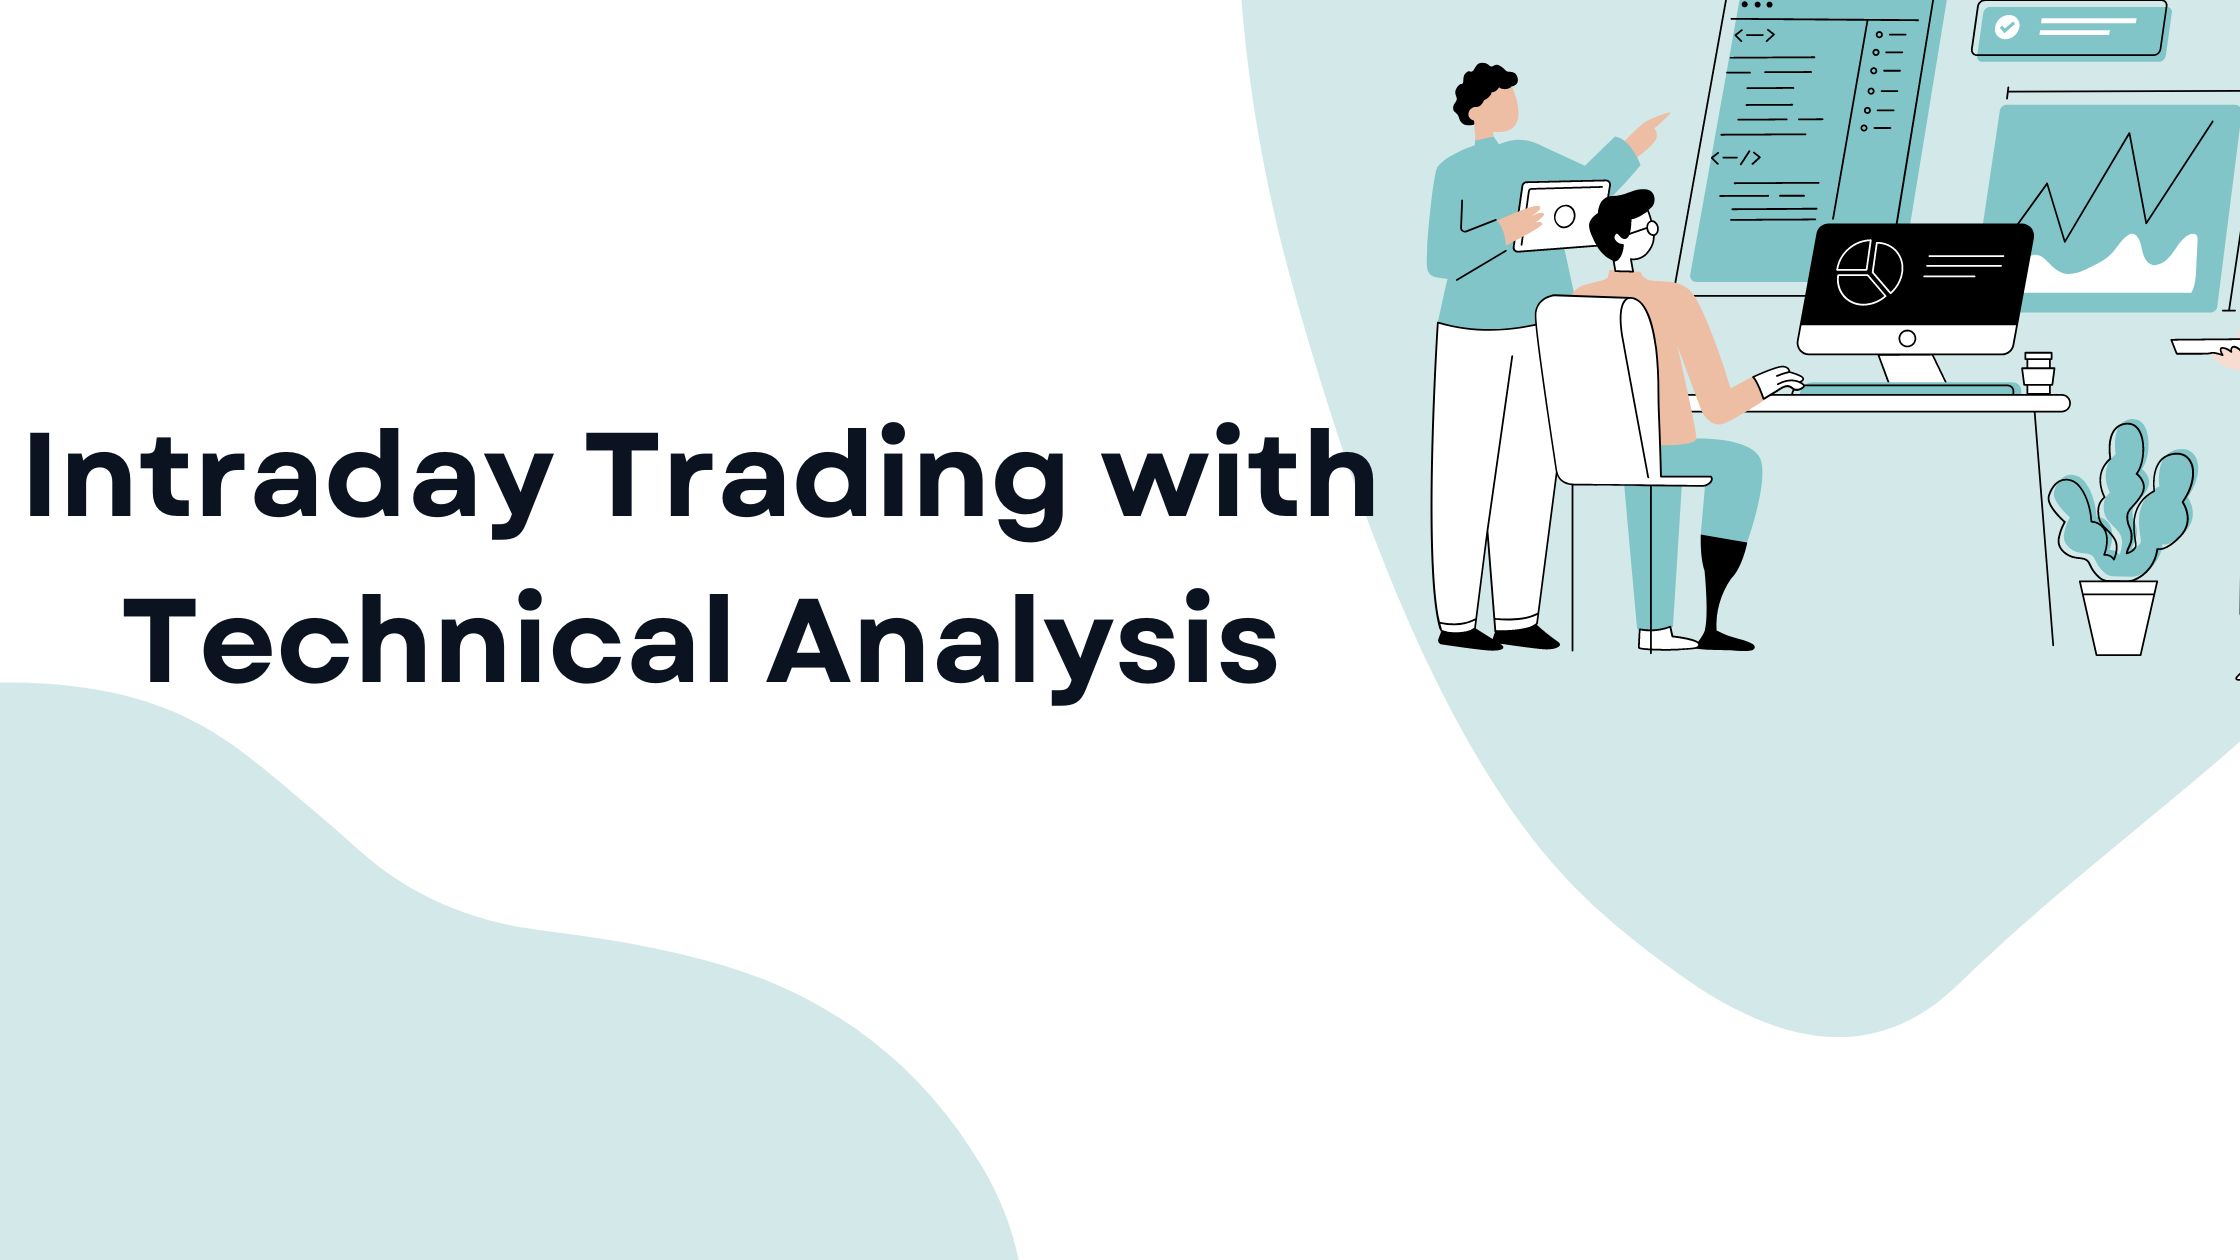 Intraday Trading with Technical Analysis